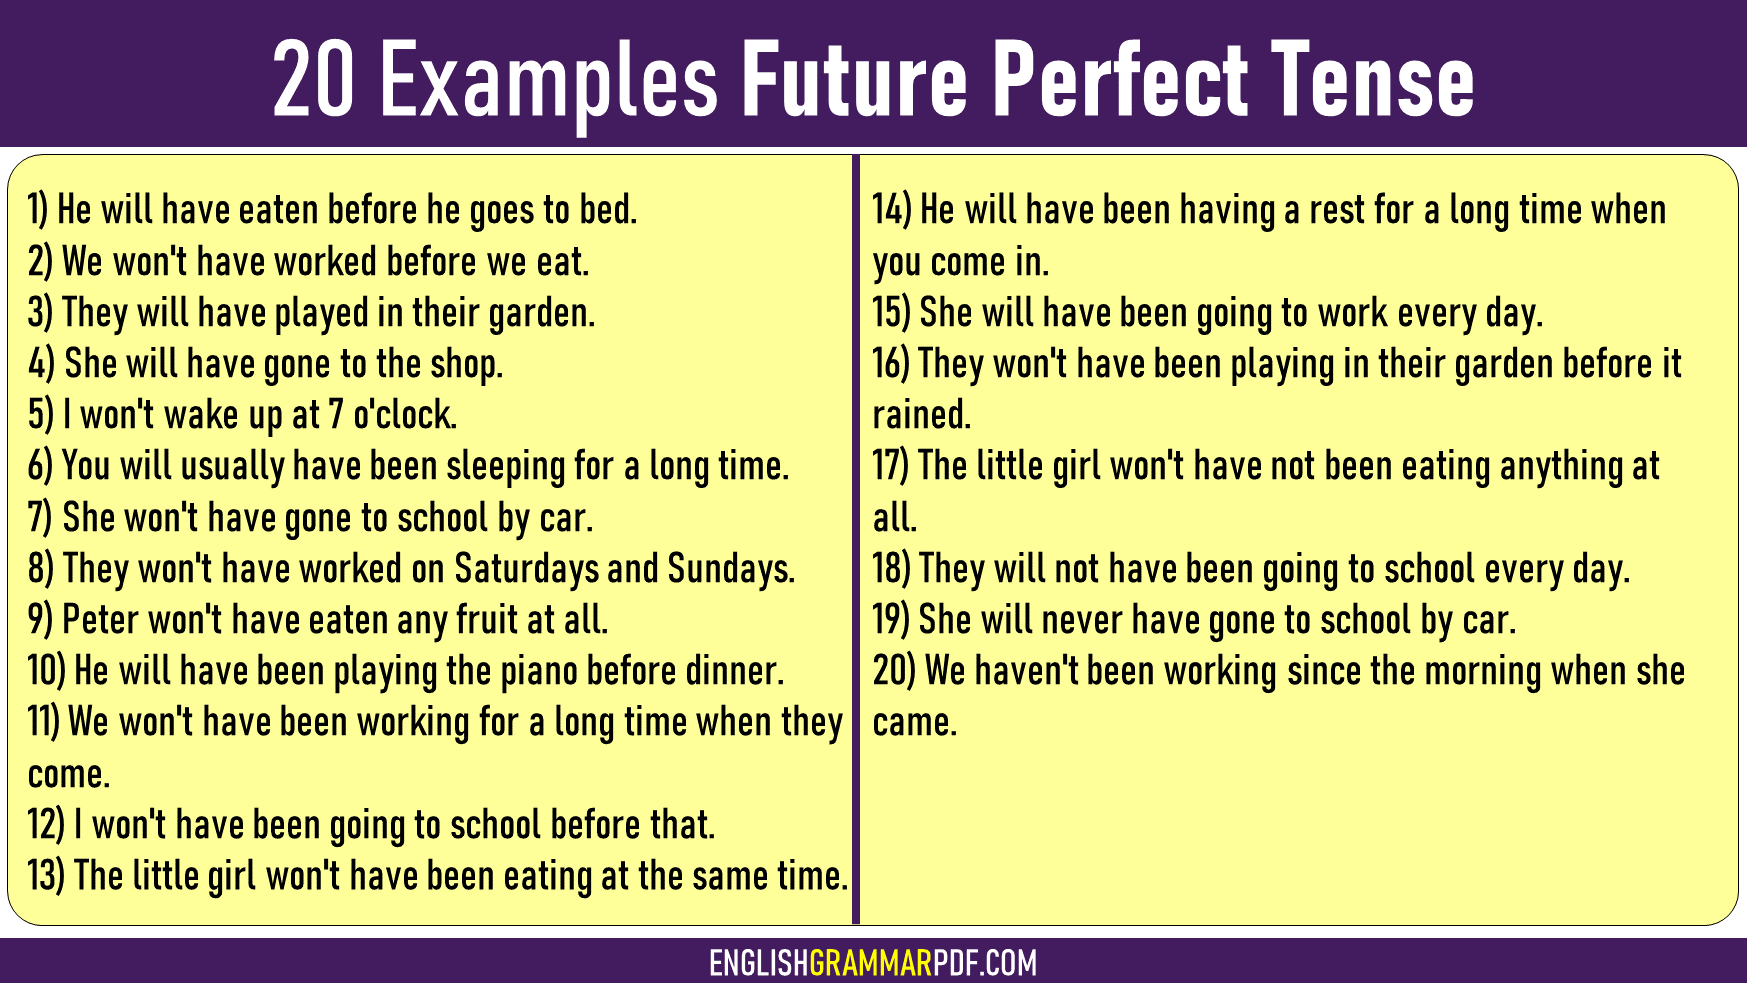 what-is-the-future-perfect-tense-definition-examples-of